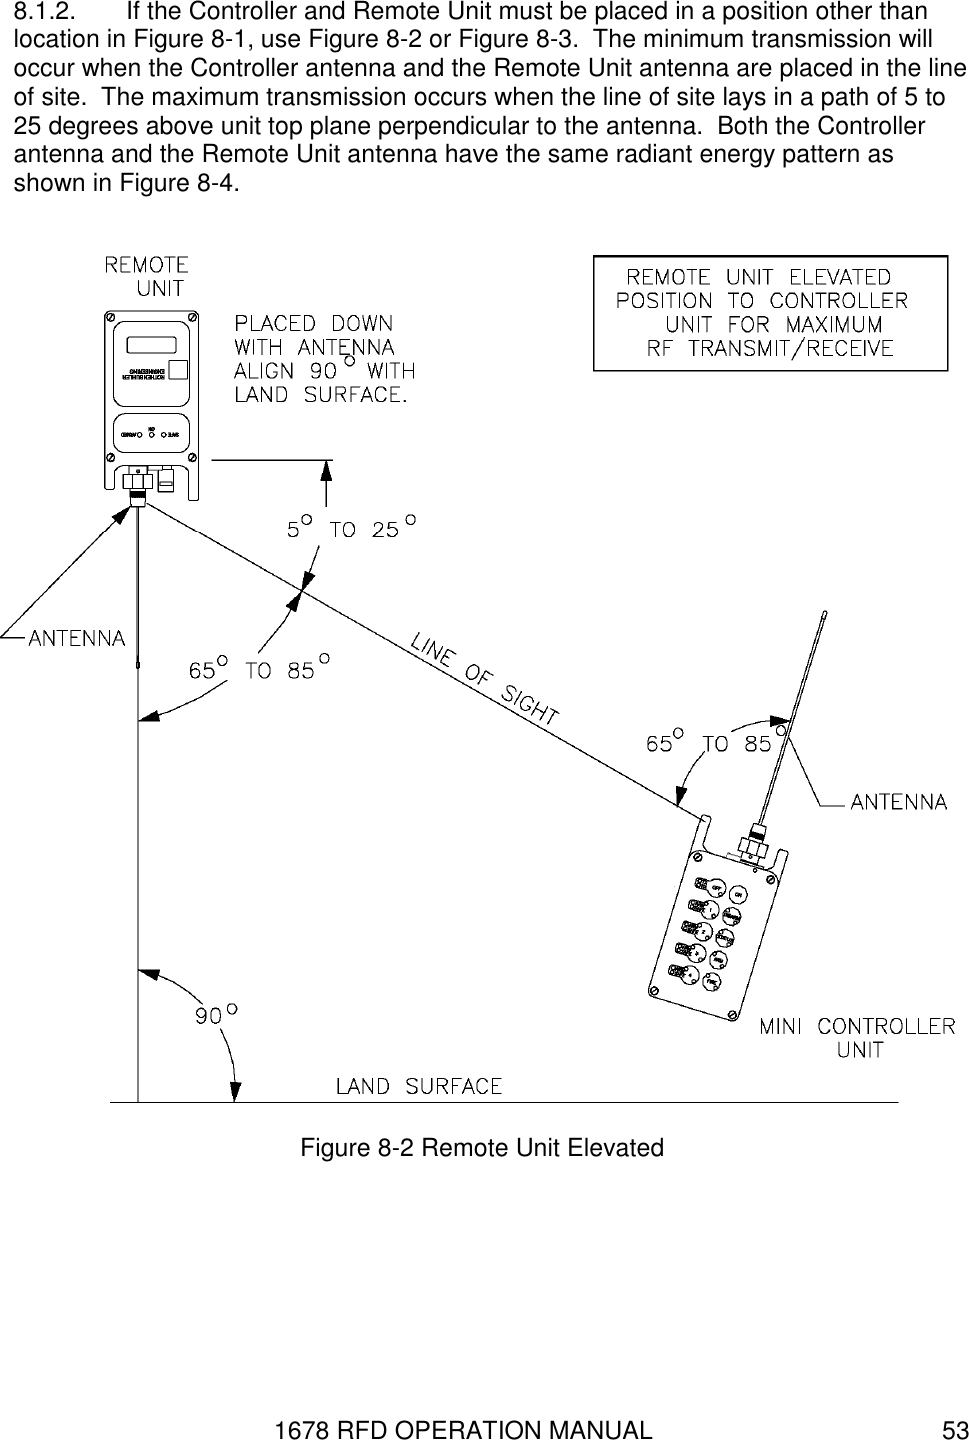 1678 RFD OPERATION MANUAL  53 8.1.2.  If the Controller and Remote Unit must be placed in a position other than location in Figure 8-1, use Figure 8-2 or Figure 8-3.  The minimum transmission will occur when the Controller antenna and the Remote Unit antenna are placed in the line of site.  The maximum transmission occurs when the line of site lays in a path of 5 to 25 degrees above unit top plane perpendicular to the antenna.  Both the Controller antenna and the Remote Unit antenna have the same radiant energy pattern as shown in Figure 8-4.  Figure 8-2 Remote Unit Elevated 